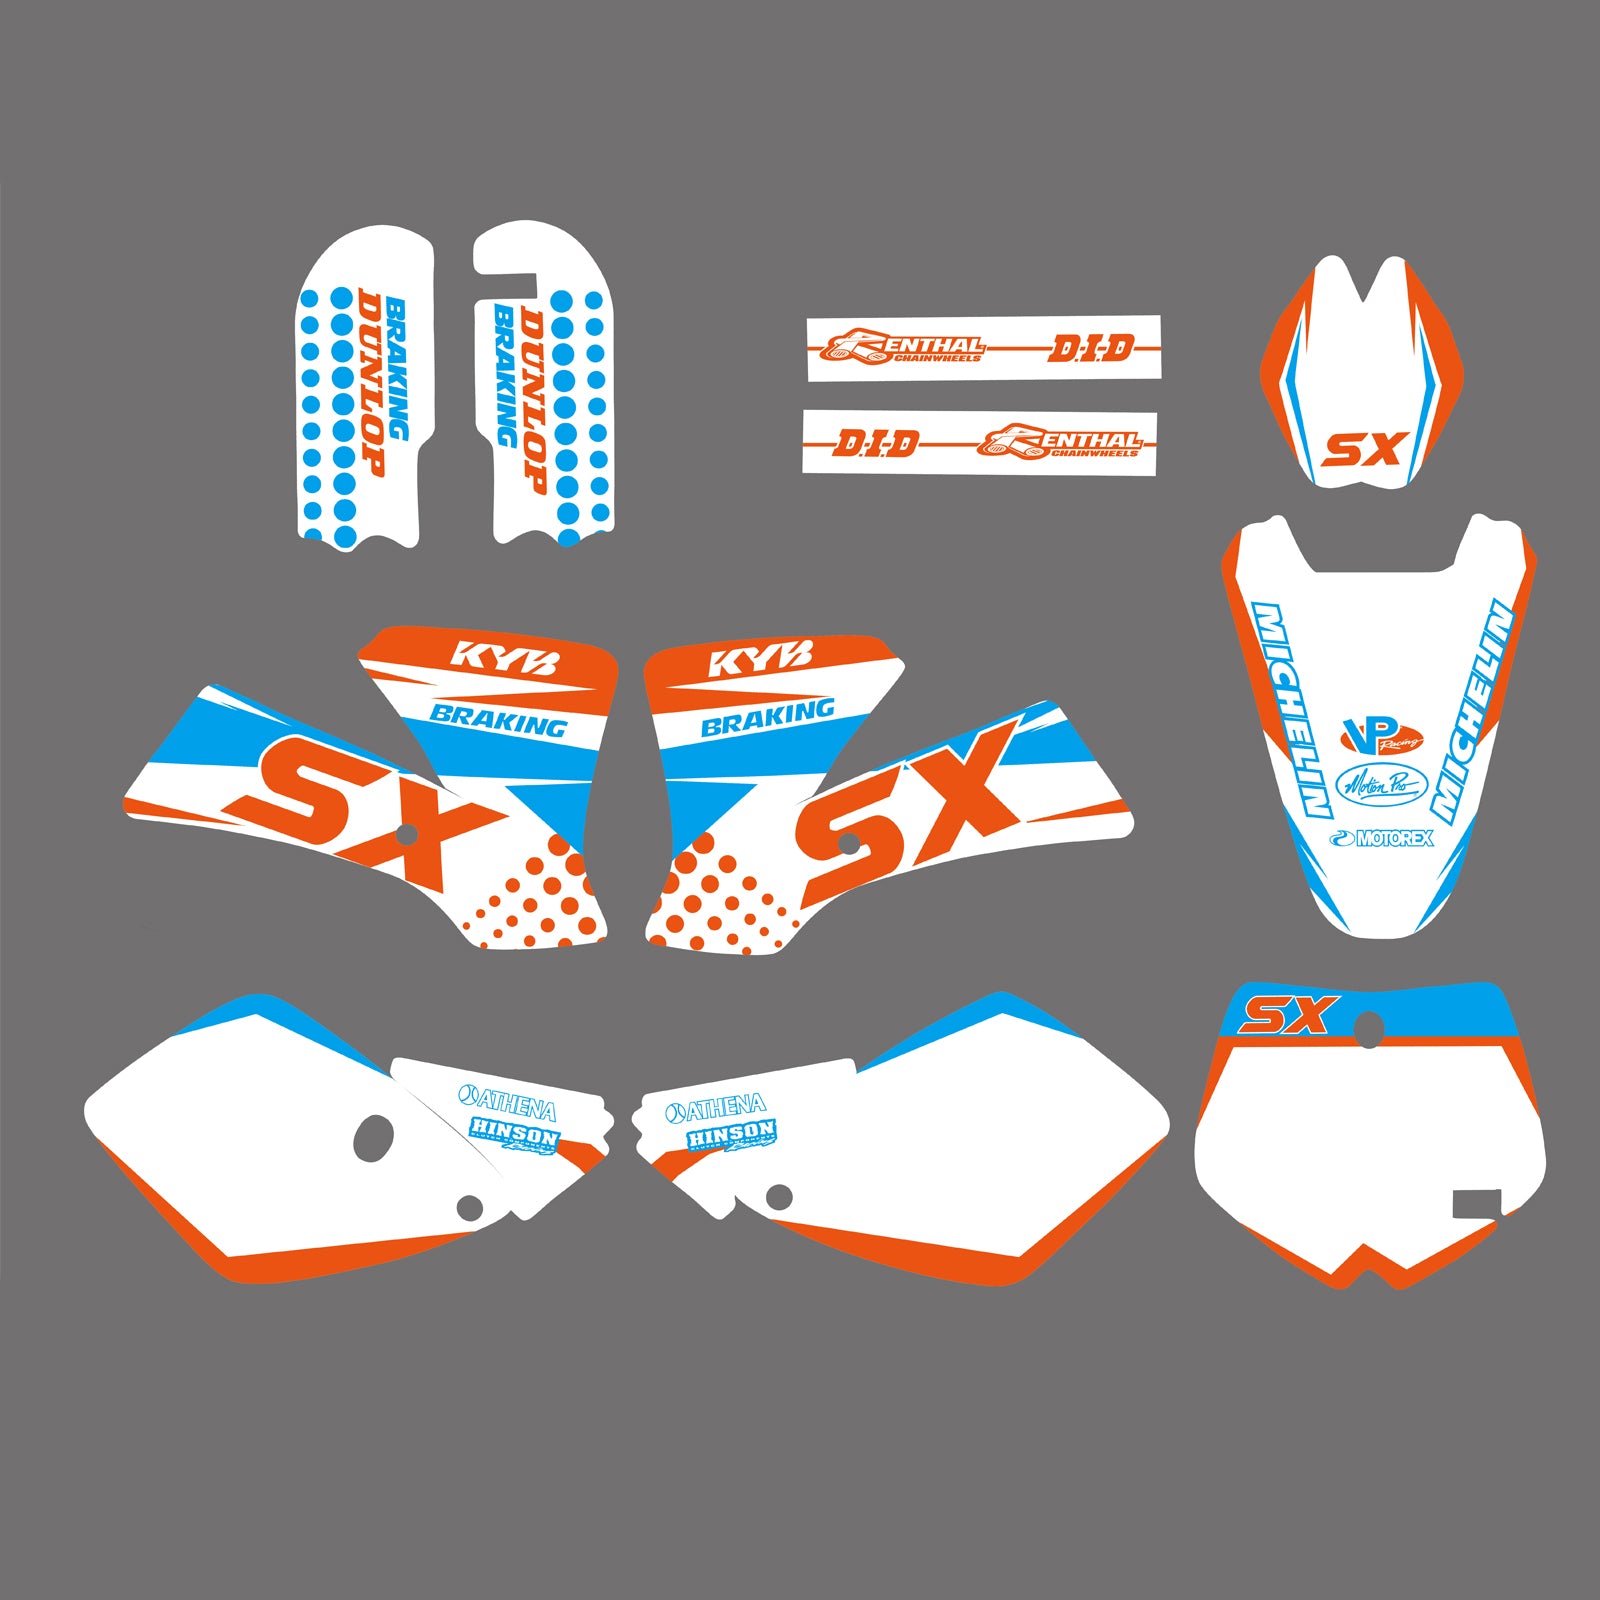 Motorcycle Graphics & Background Decals Kits for KTM SX65 02-08